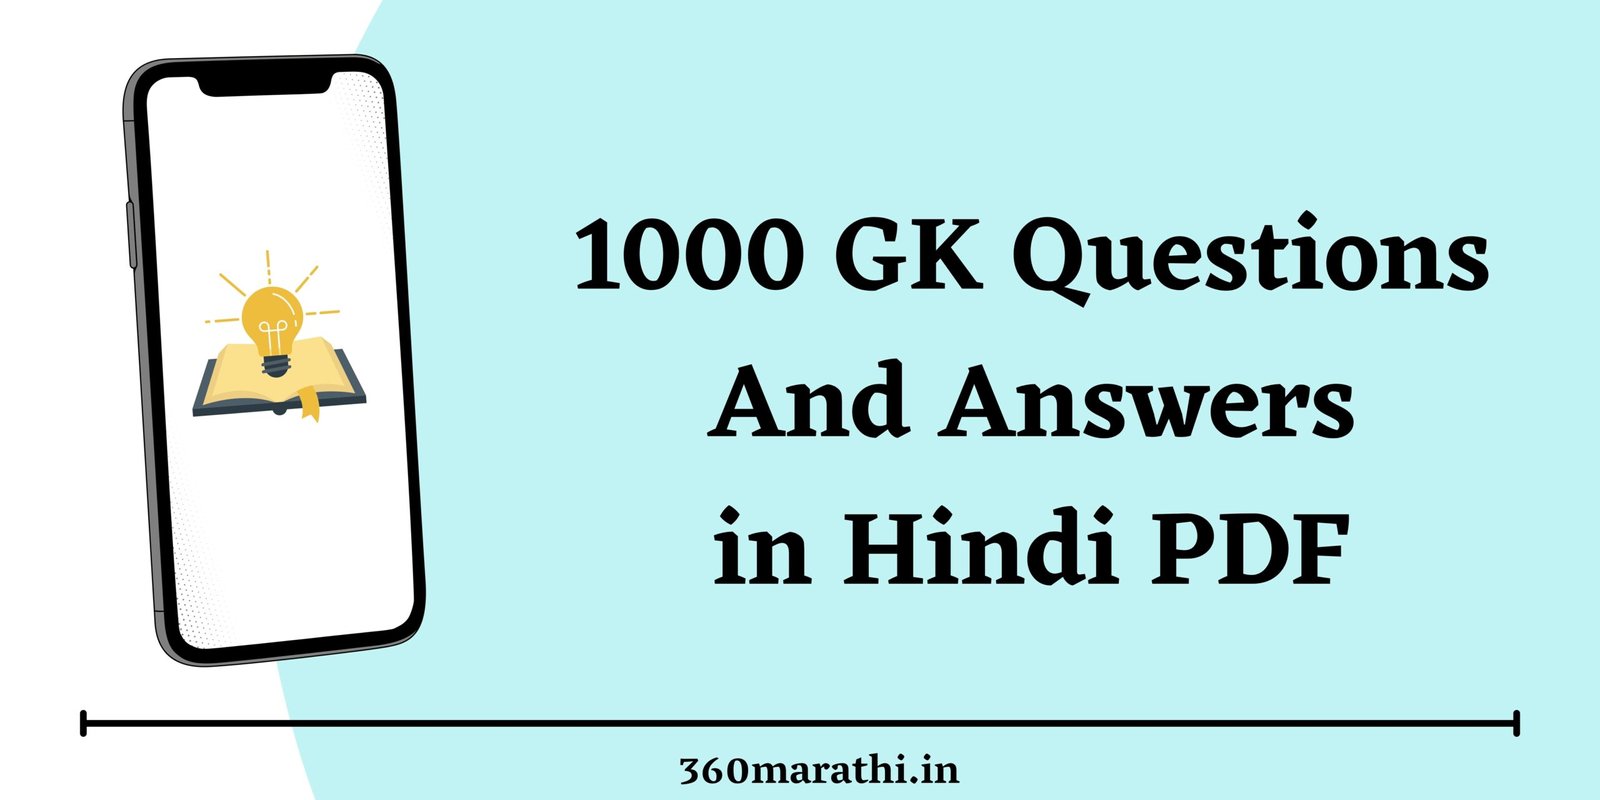 1000 GK Questions And Answers in Hindi PDF